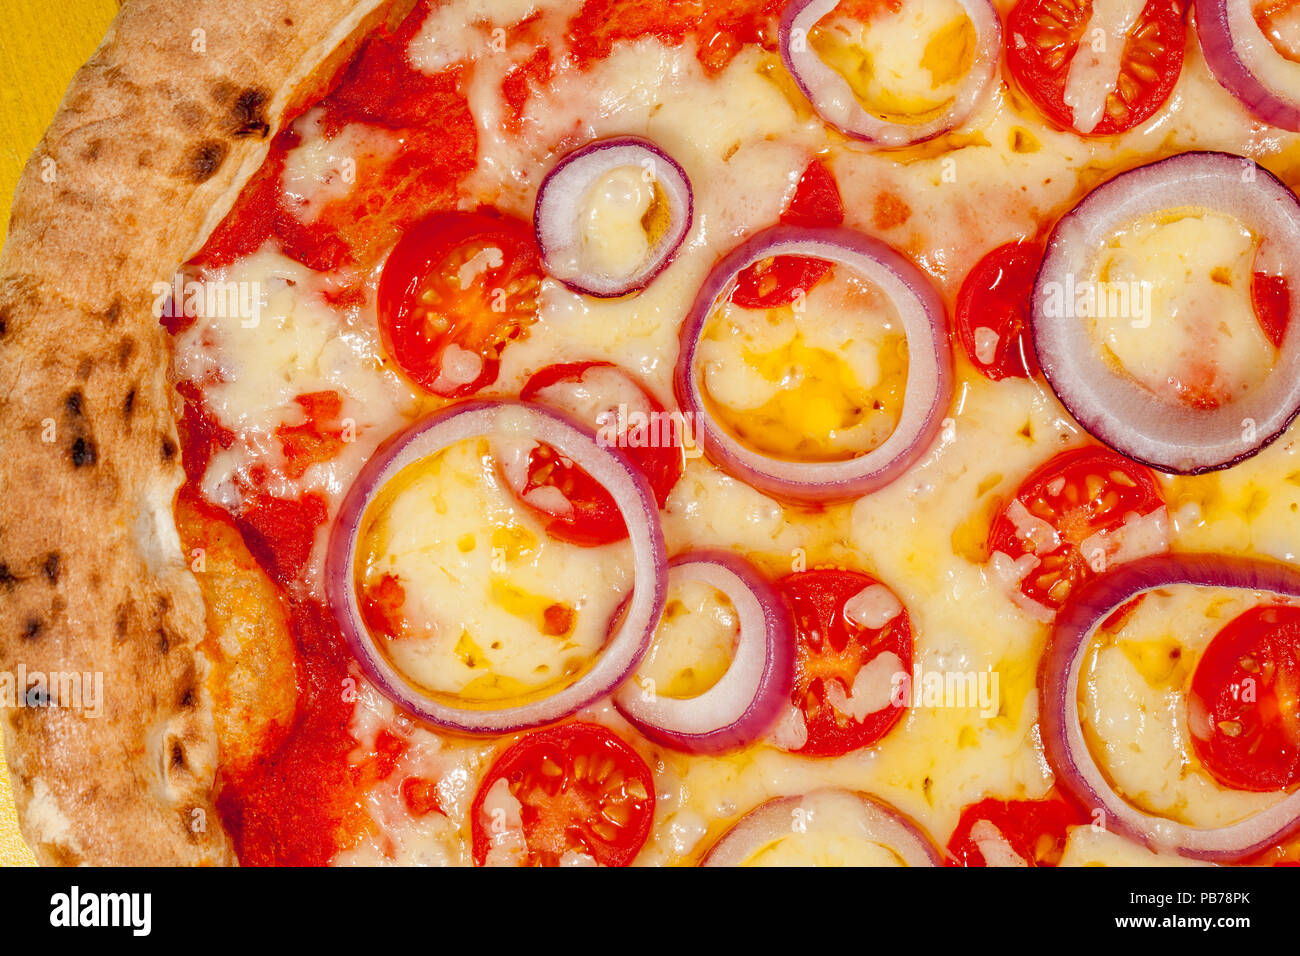 Hot pizza close-up. Cheese onion and tomato on scorched sourdough base. Classic Italian comfort food. Stock Photo